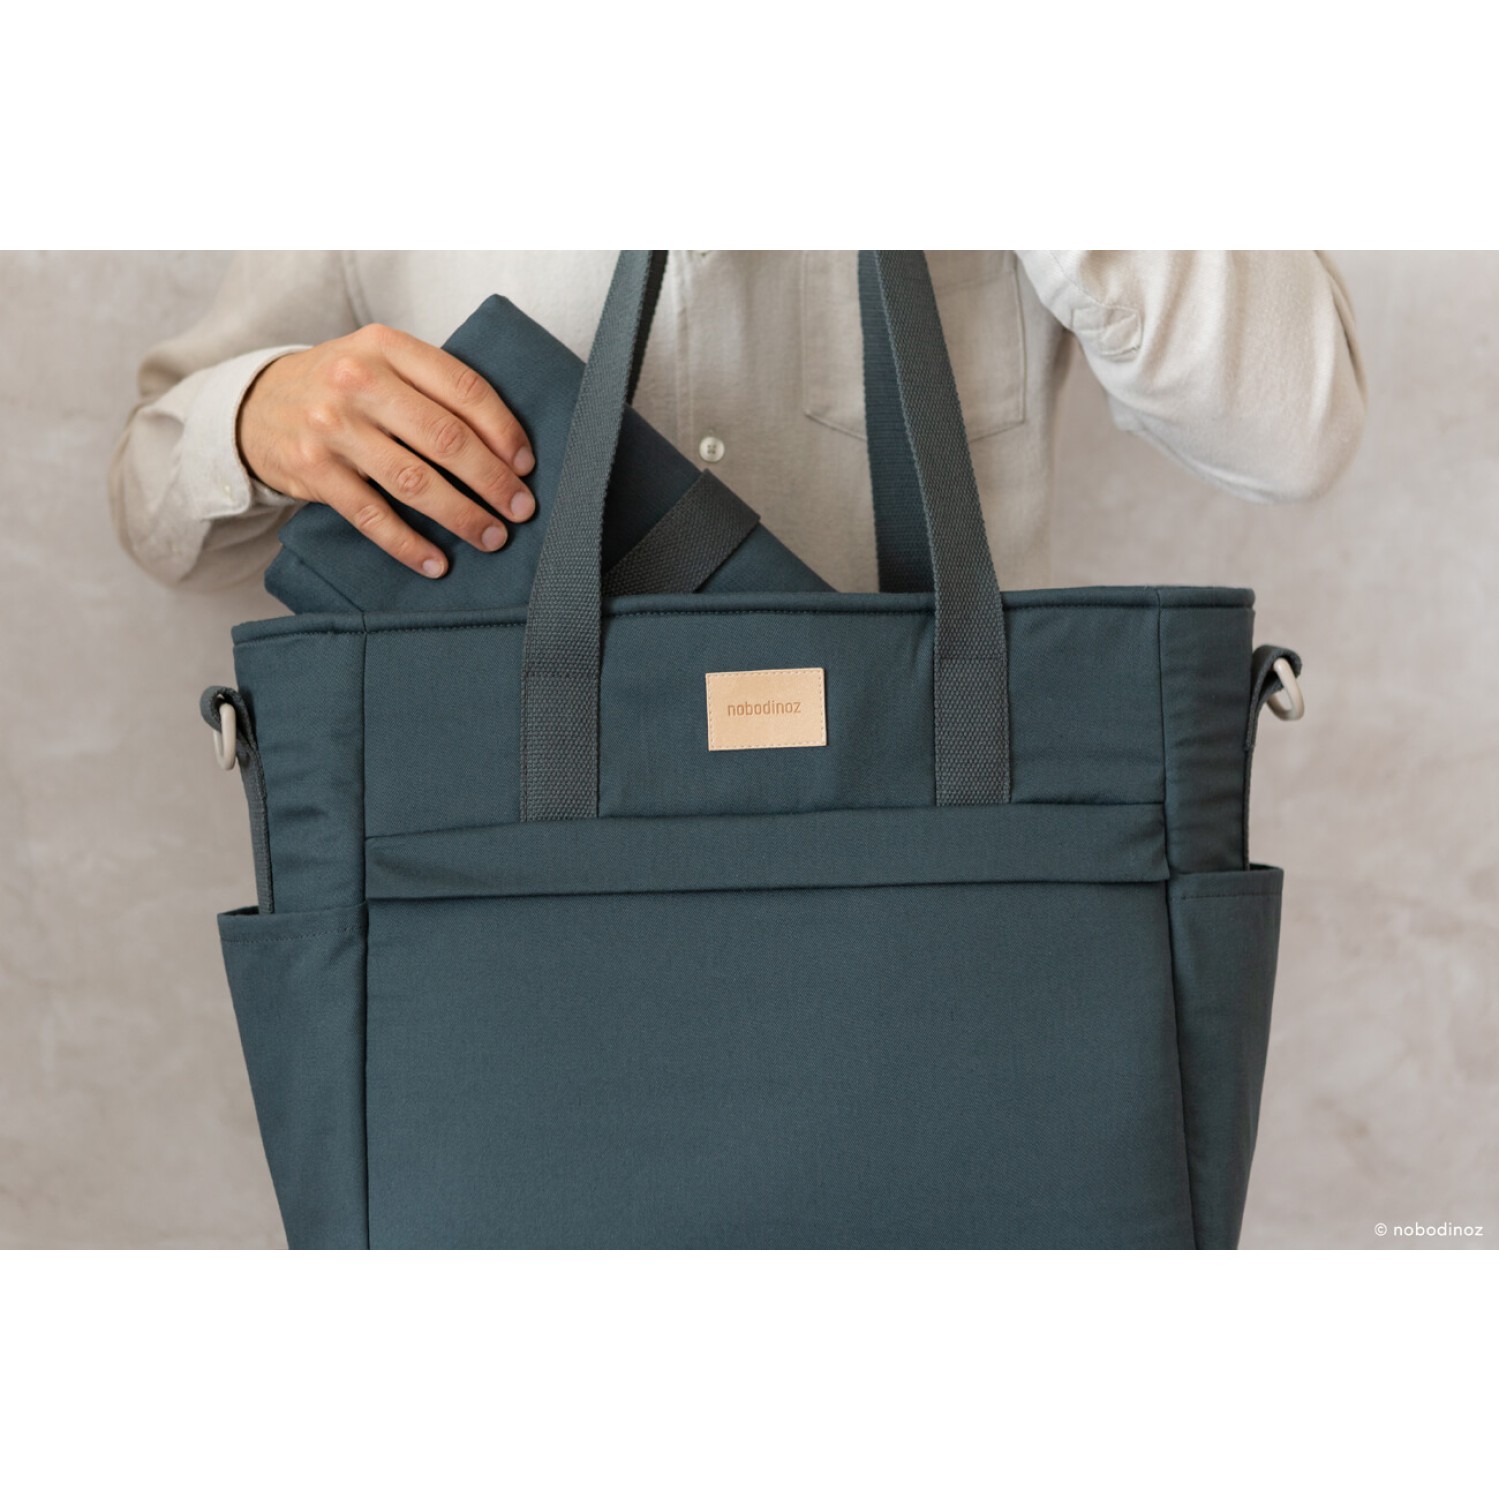 BABY ON THE GO WATERPROOF CHANGING BAG | CARBON BLUE